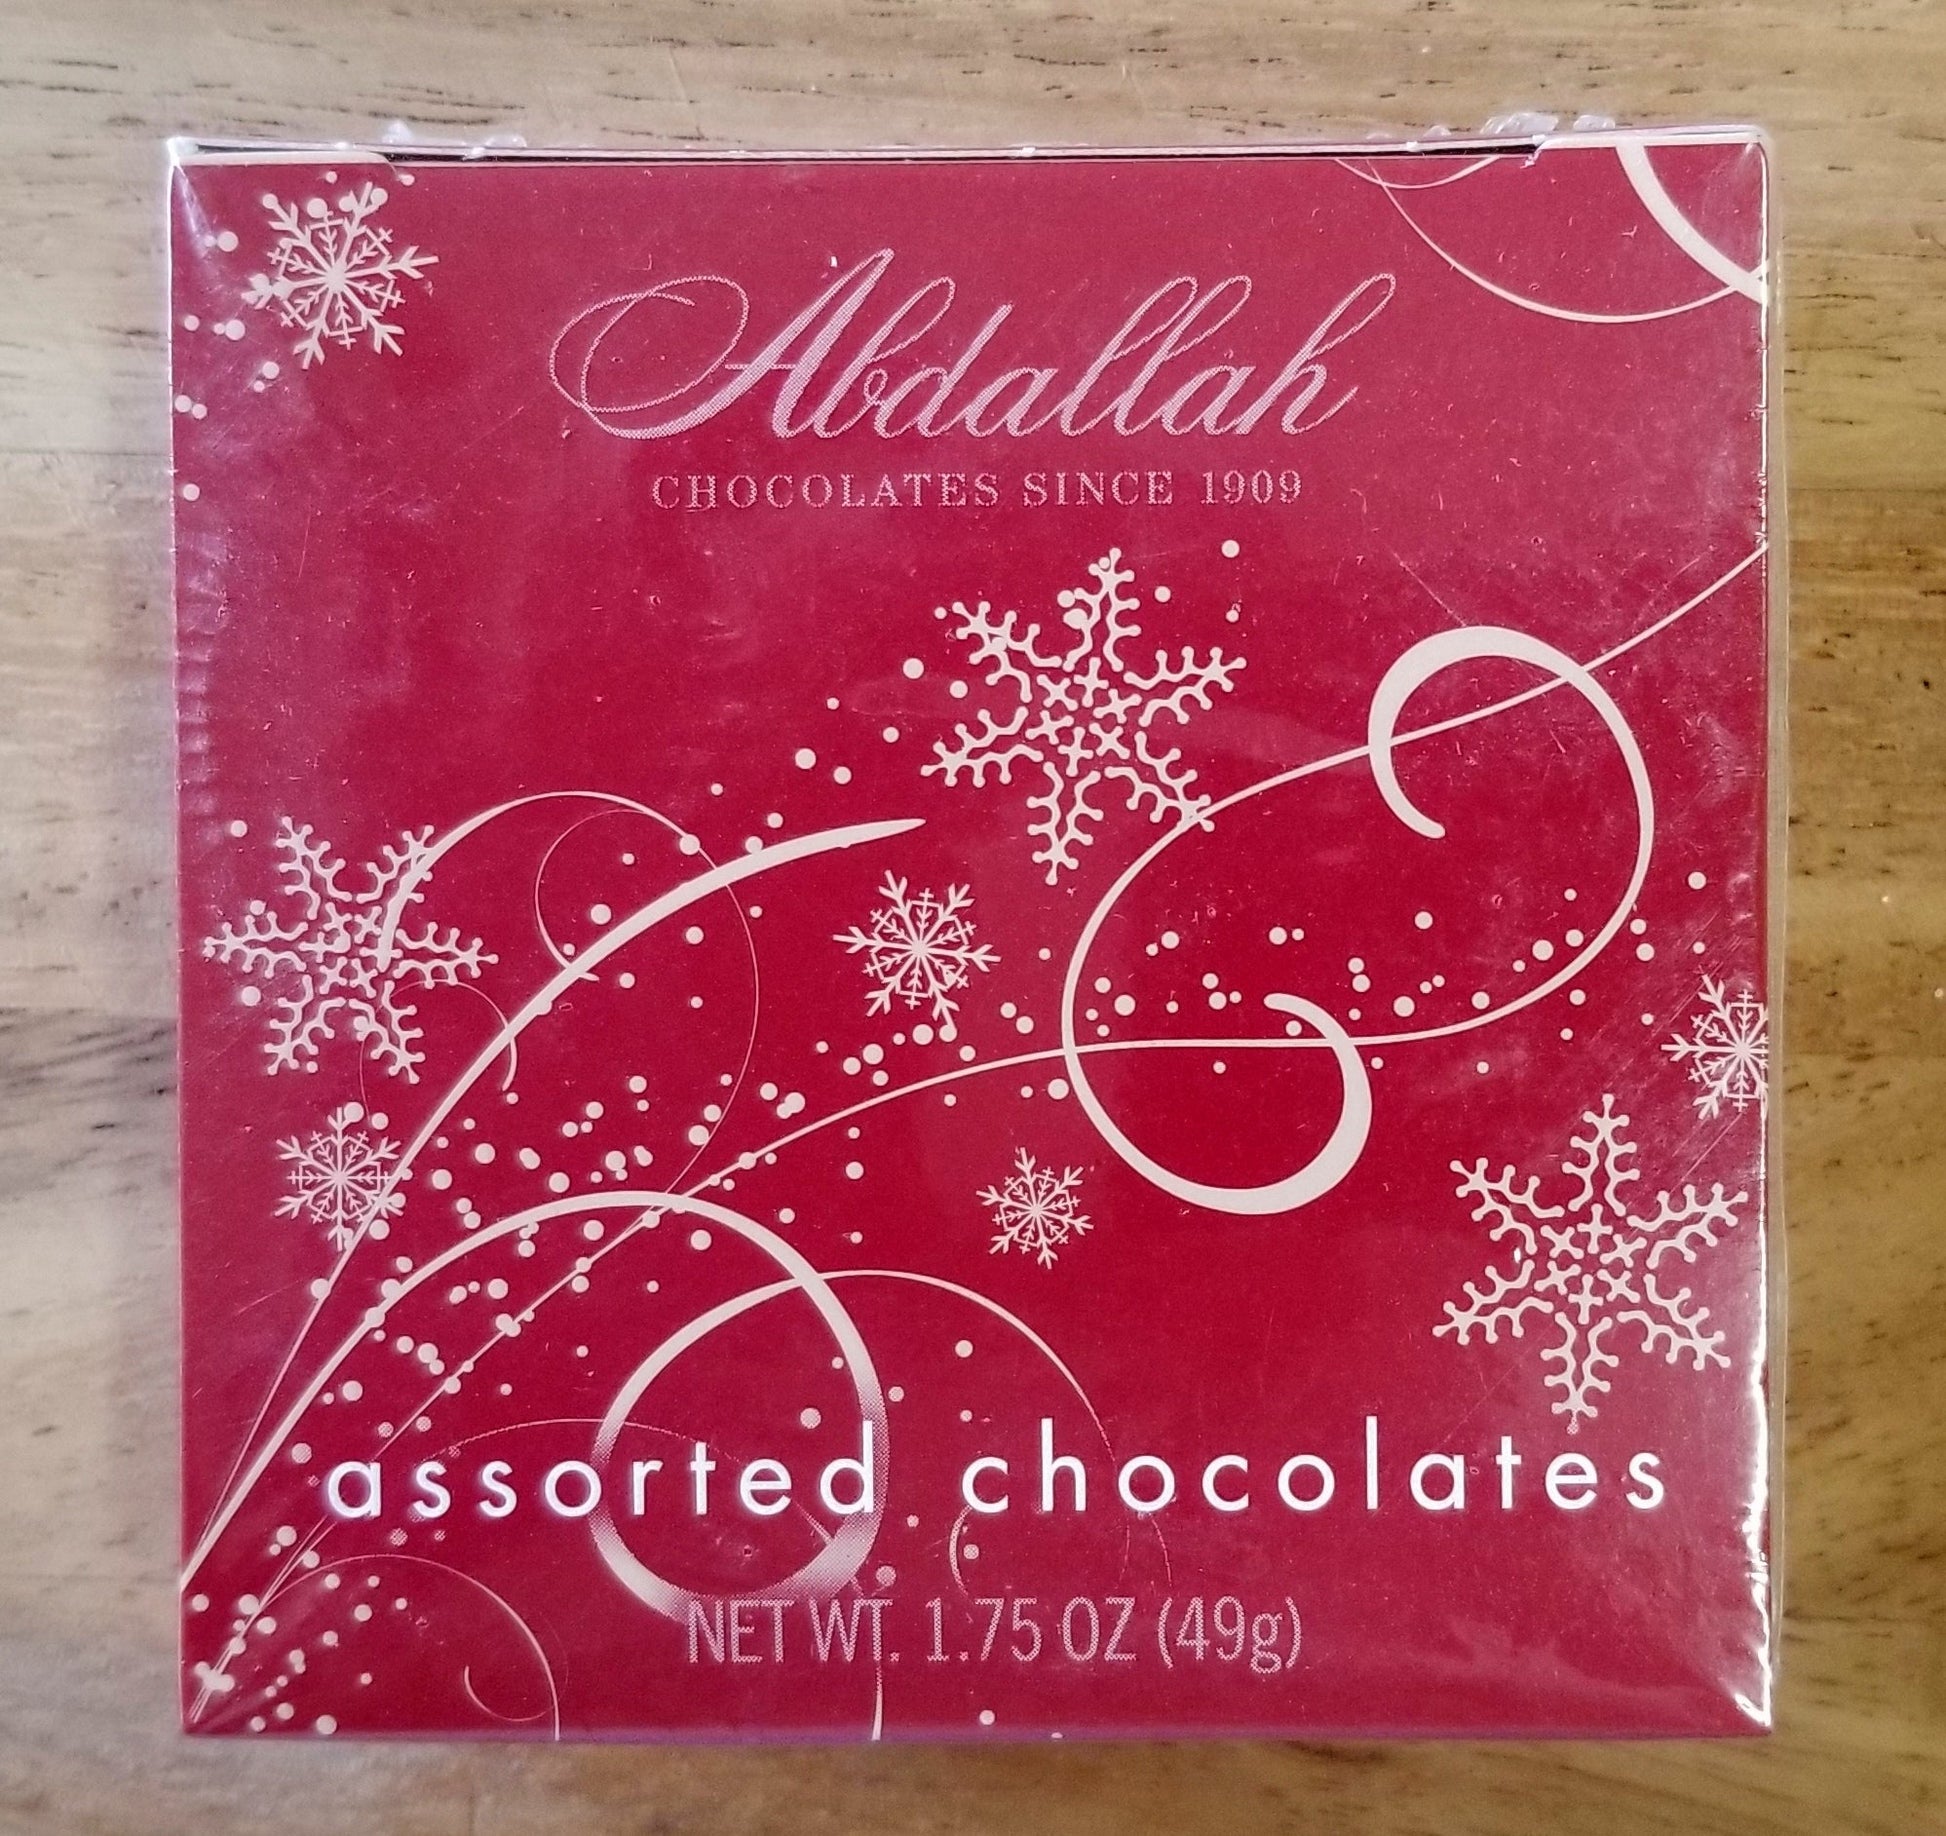 Abdallah Assorted Chocolates 4 Piece Box - Eichtens Cheeses, Gifts & FoodsCandy & Chocolate